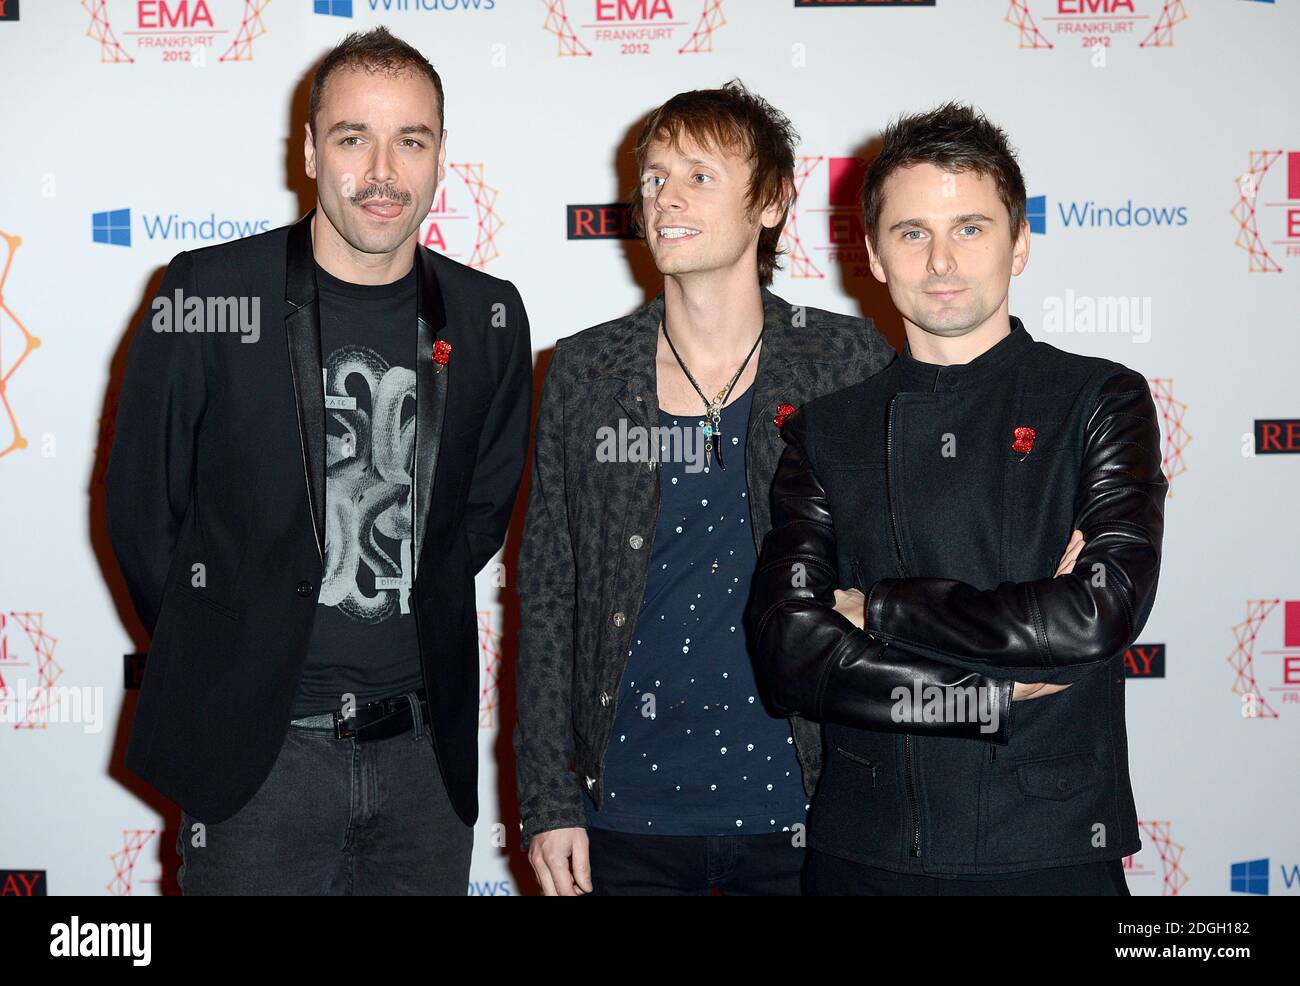 Christopher Wolstenholme, Dominic Howard and Matthew Bellamy of Muse arriving for the 2012 MTV Europe Music Awards at the Festhalle Frankfurt, Germany. Stock Photo